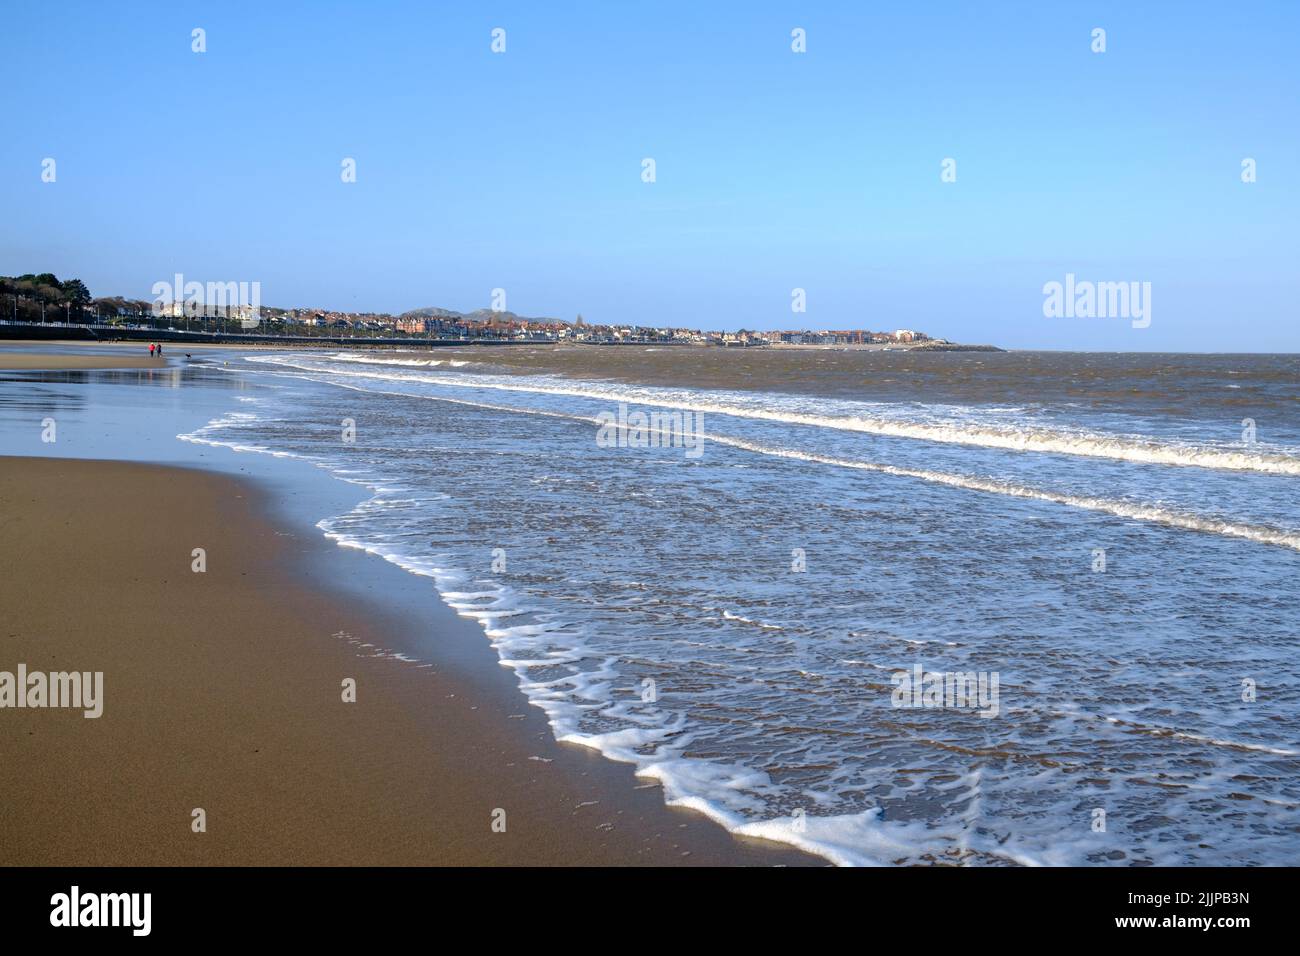 An areal view of the beach on a sunny day in Colwyn bay, North Wales UK Stock Photo